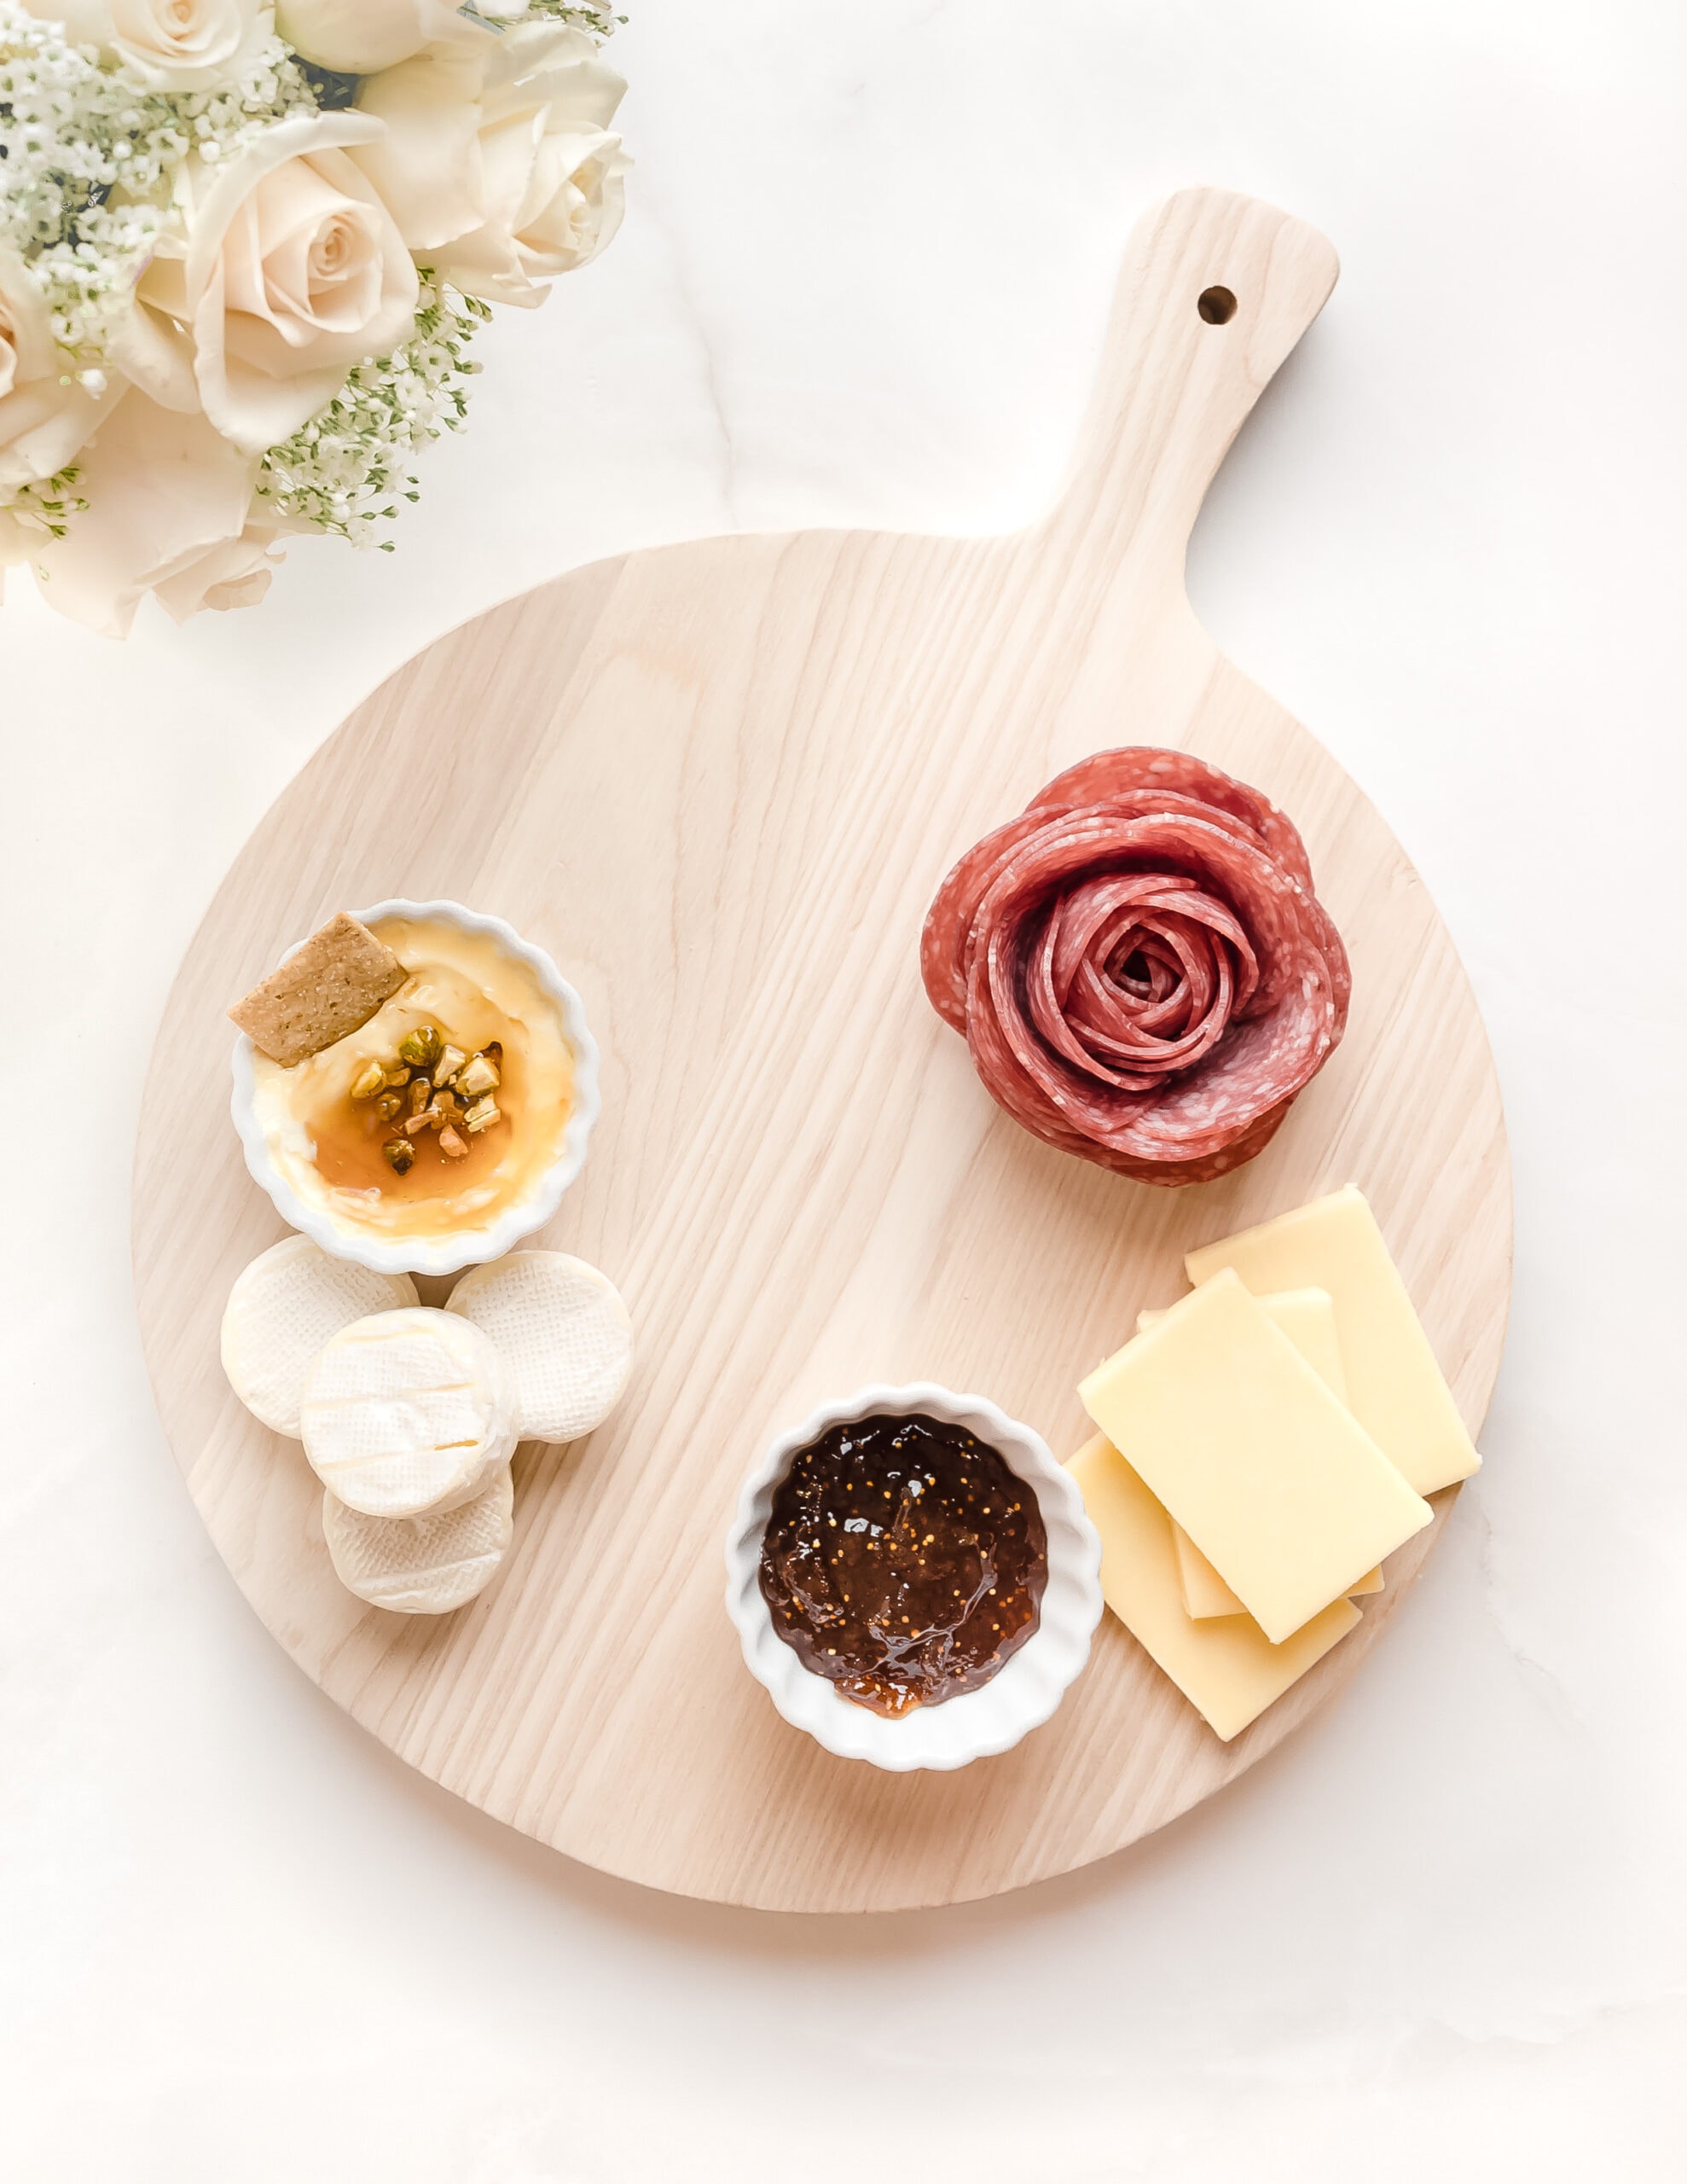 A small round wooden charcuterie board with marscapone cheese, fig jam, brie, cheddar, and a salami rose. Across from the board is a vase of pink roses. 